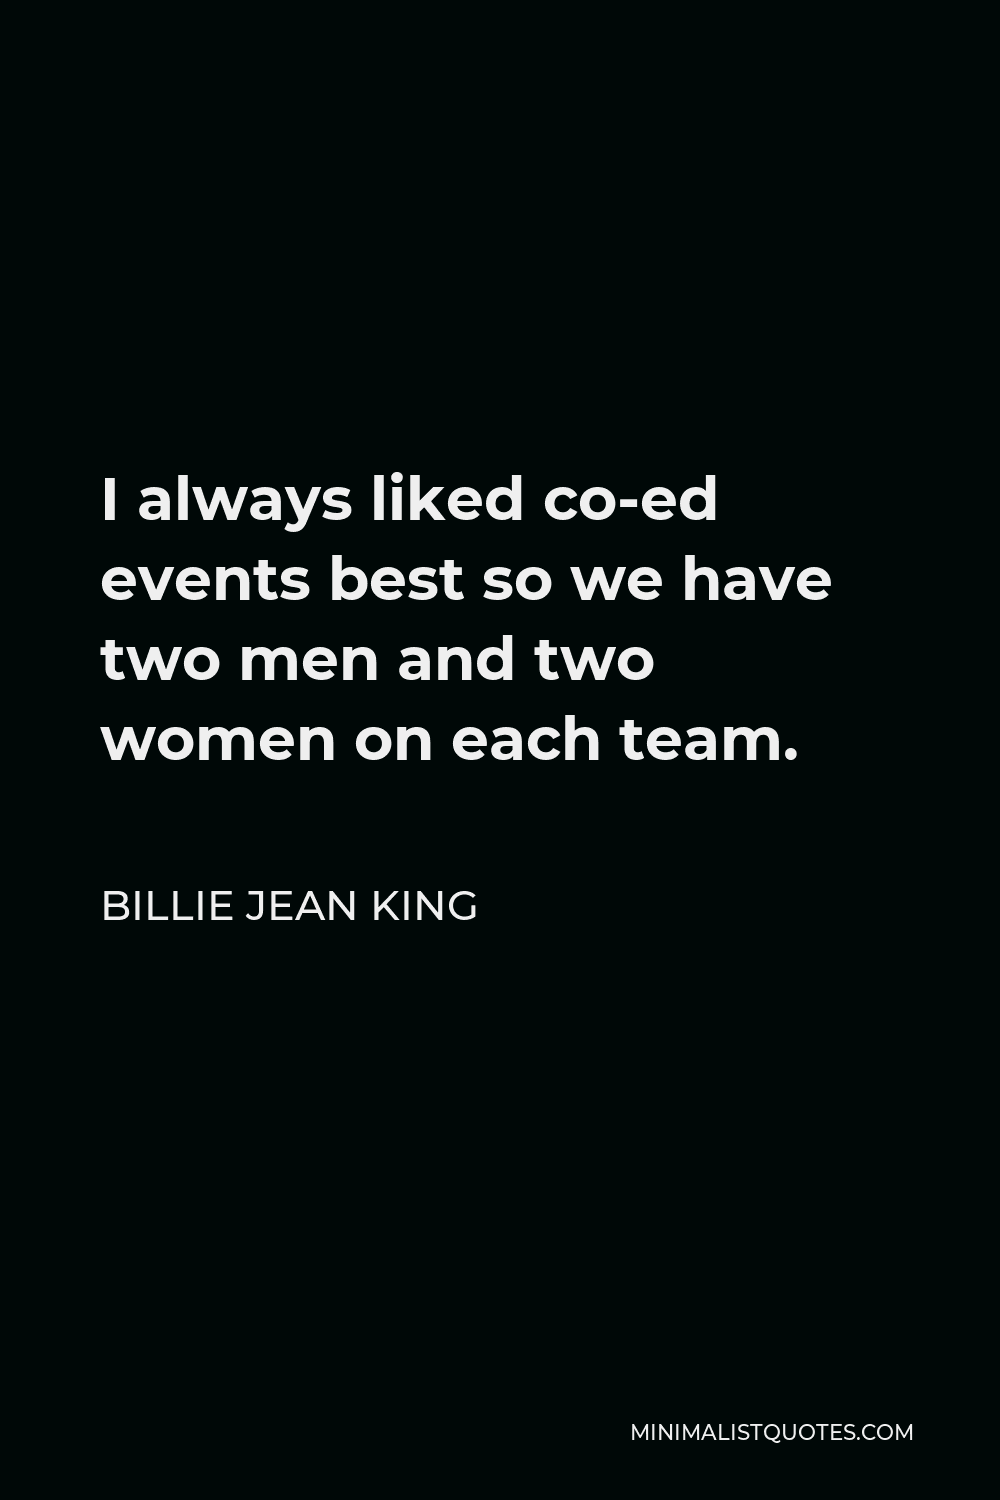 Billie Jean King Quote - I always liked co-ed events best so we have two men and two women on each team.